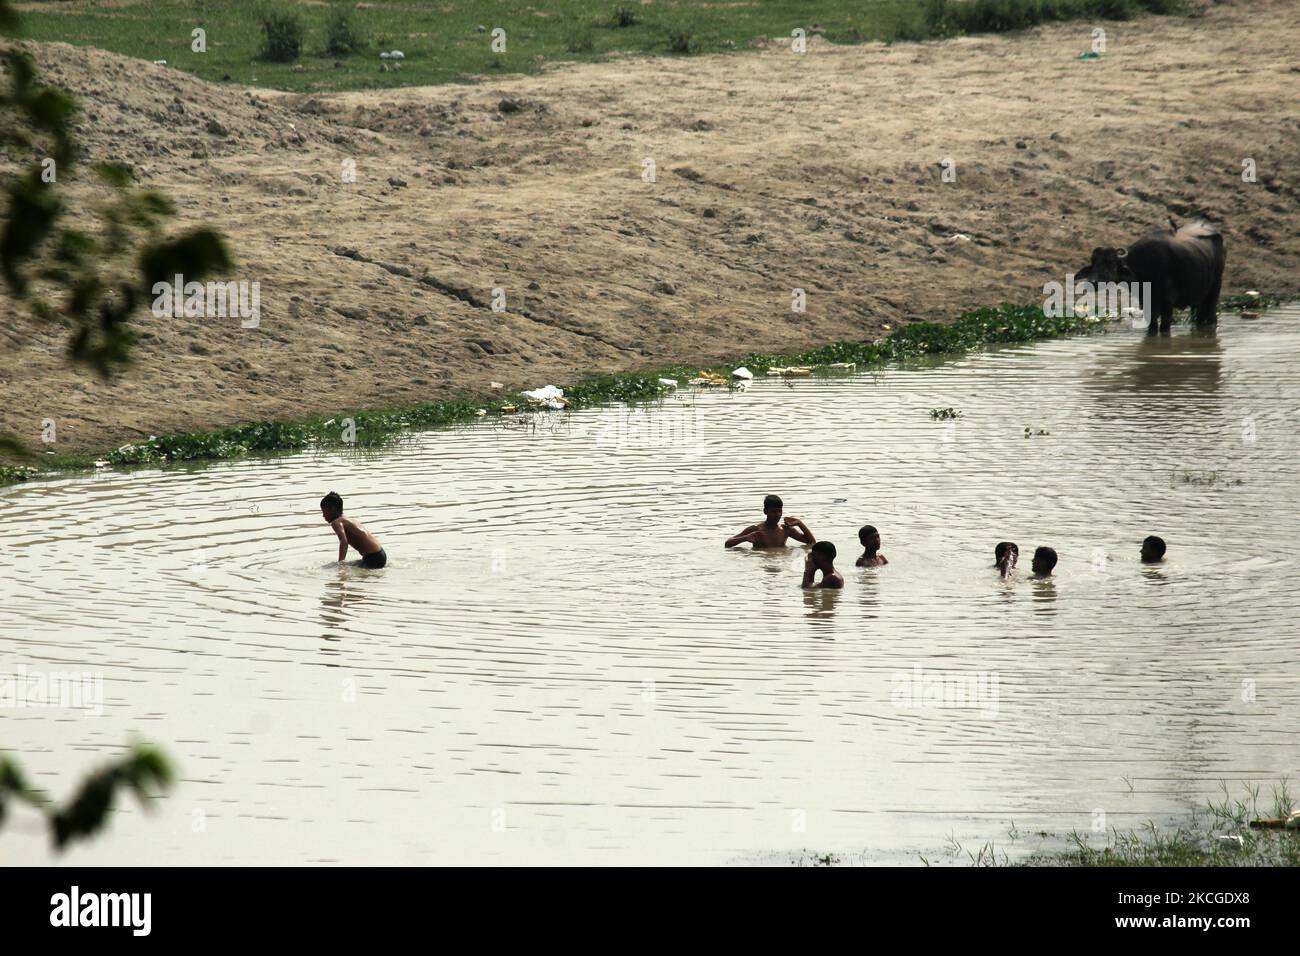 Young boys cool themselves off in a pond near the river Yamuna on a hot summer day in New Delhi, India on June 24, 2021. According to the Meteorological Department, the monsoon is not expected to arrive throughout the month and by then there is no respite from the heat. The temperature in Delhi is likely to hover around 40 degrees Celsius in the coming 7 days. (Photo by Mayank Makhija/NurPhoto) Stock Photo